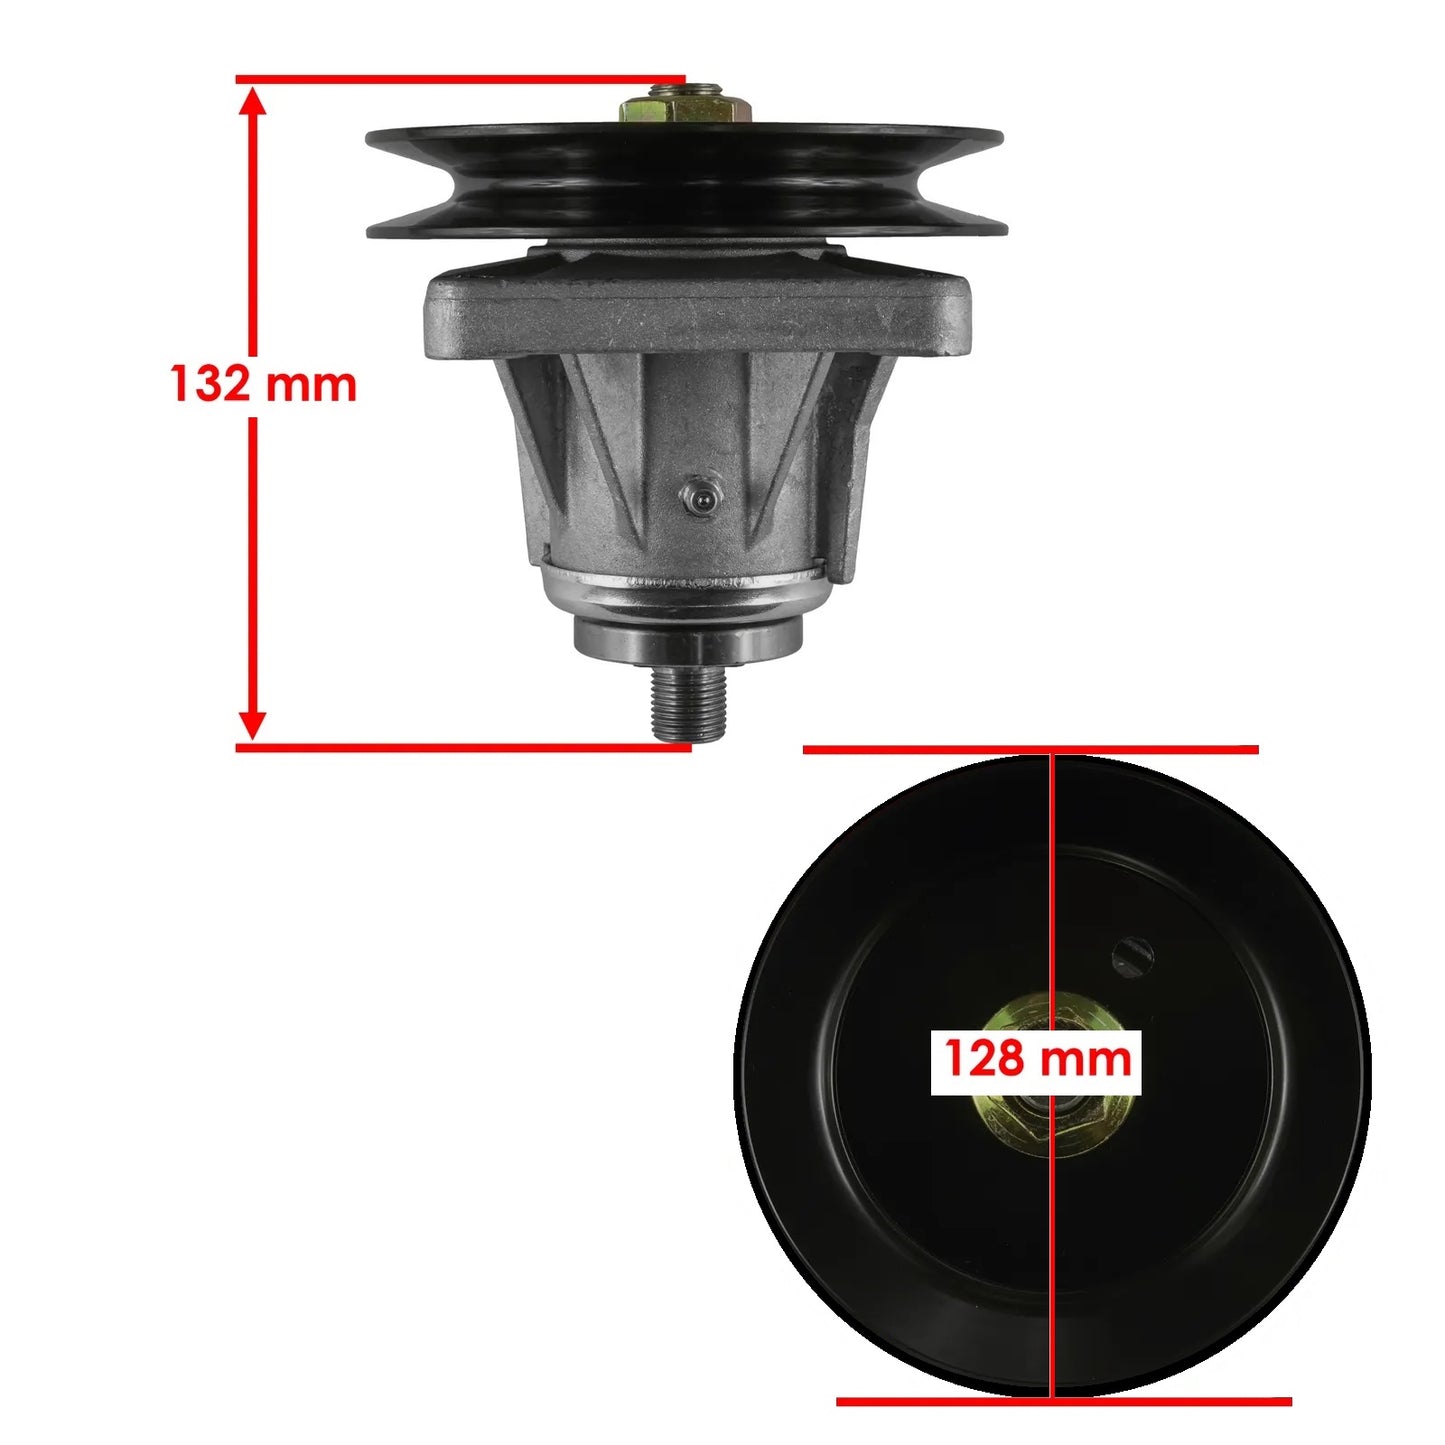 Spindle Assembly for MTD 46" 618-0240